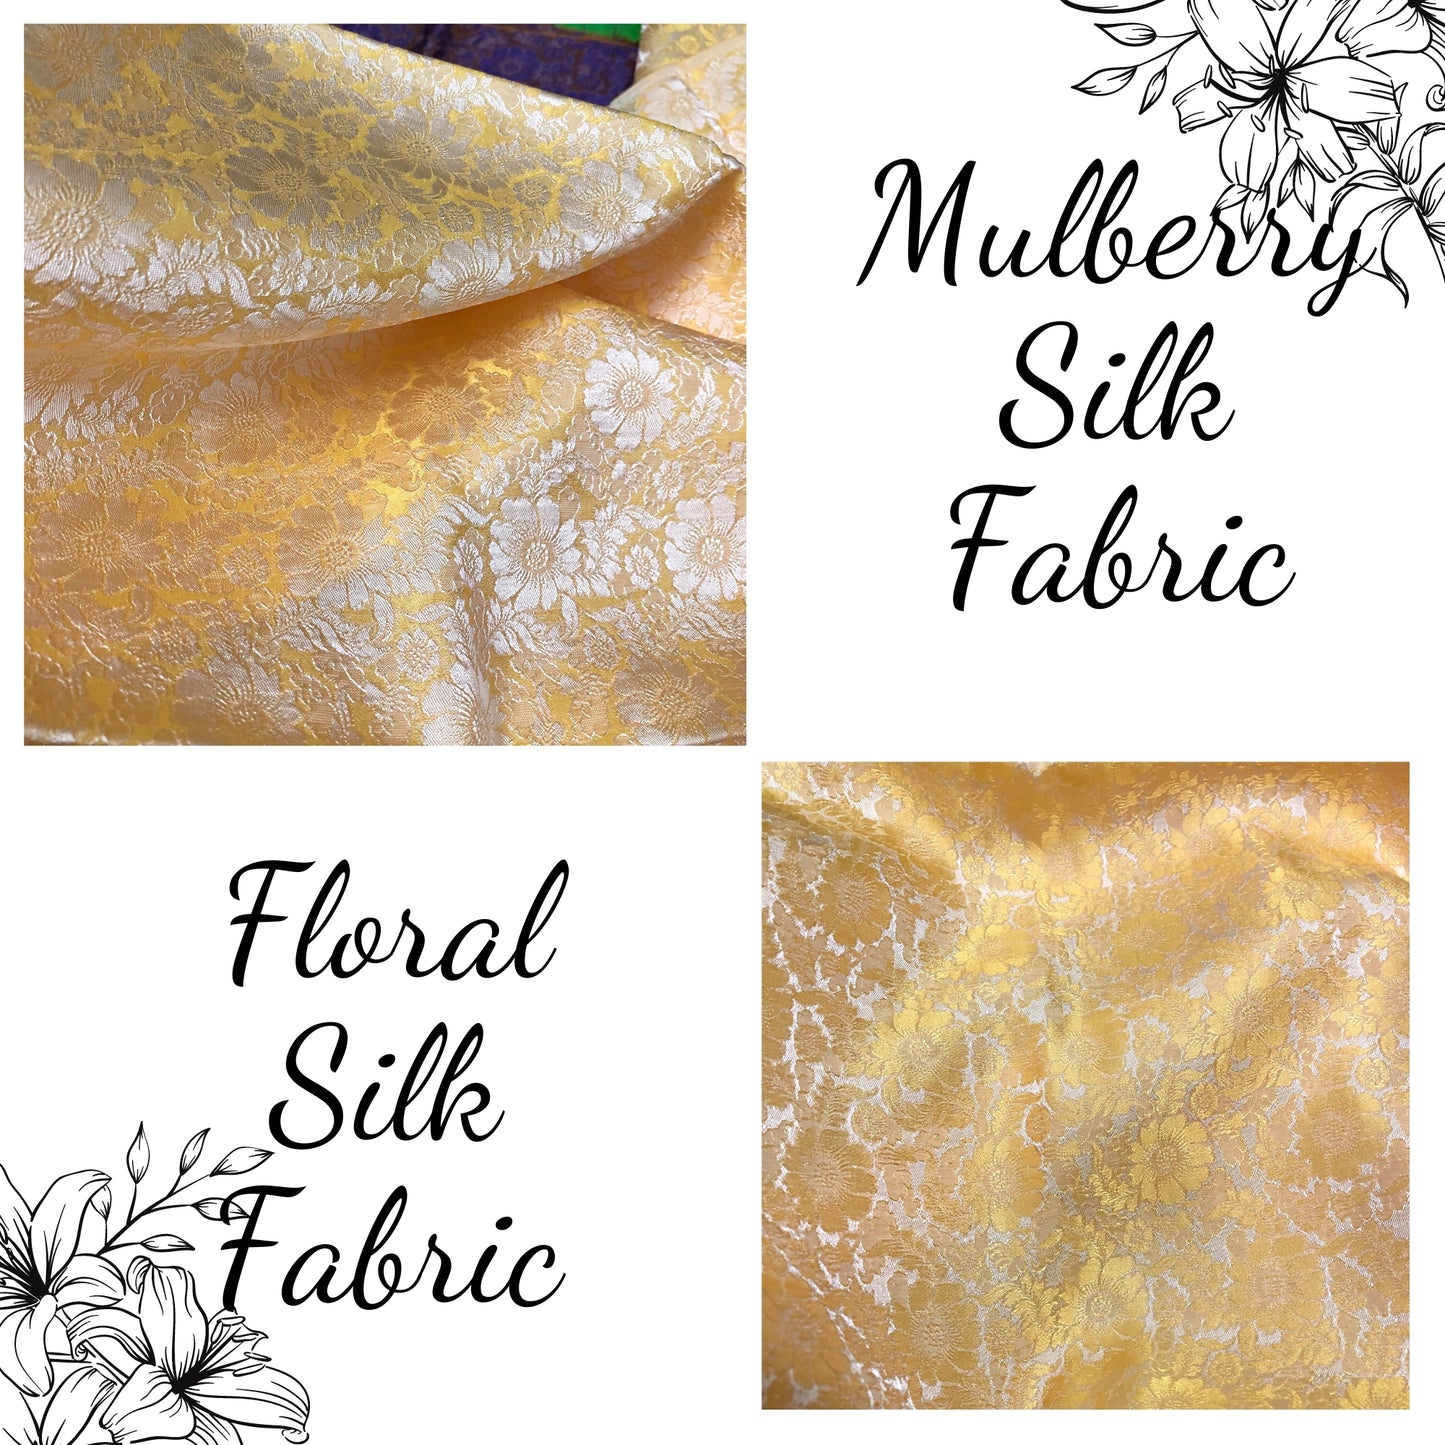 Mulberry Silk Floral Fabric – Chrysanthemum Pattern – Silk for Sewing - Dress making - Yellow silk with white floral pattern.